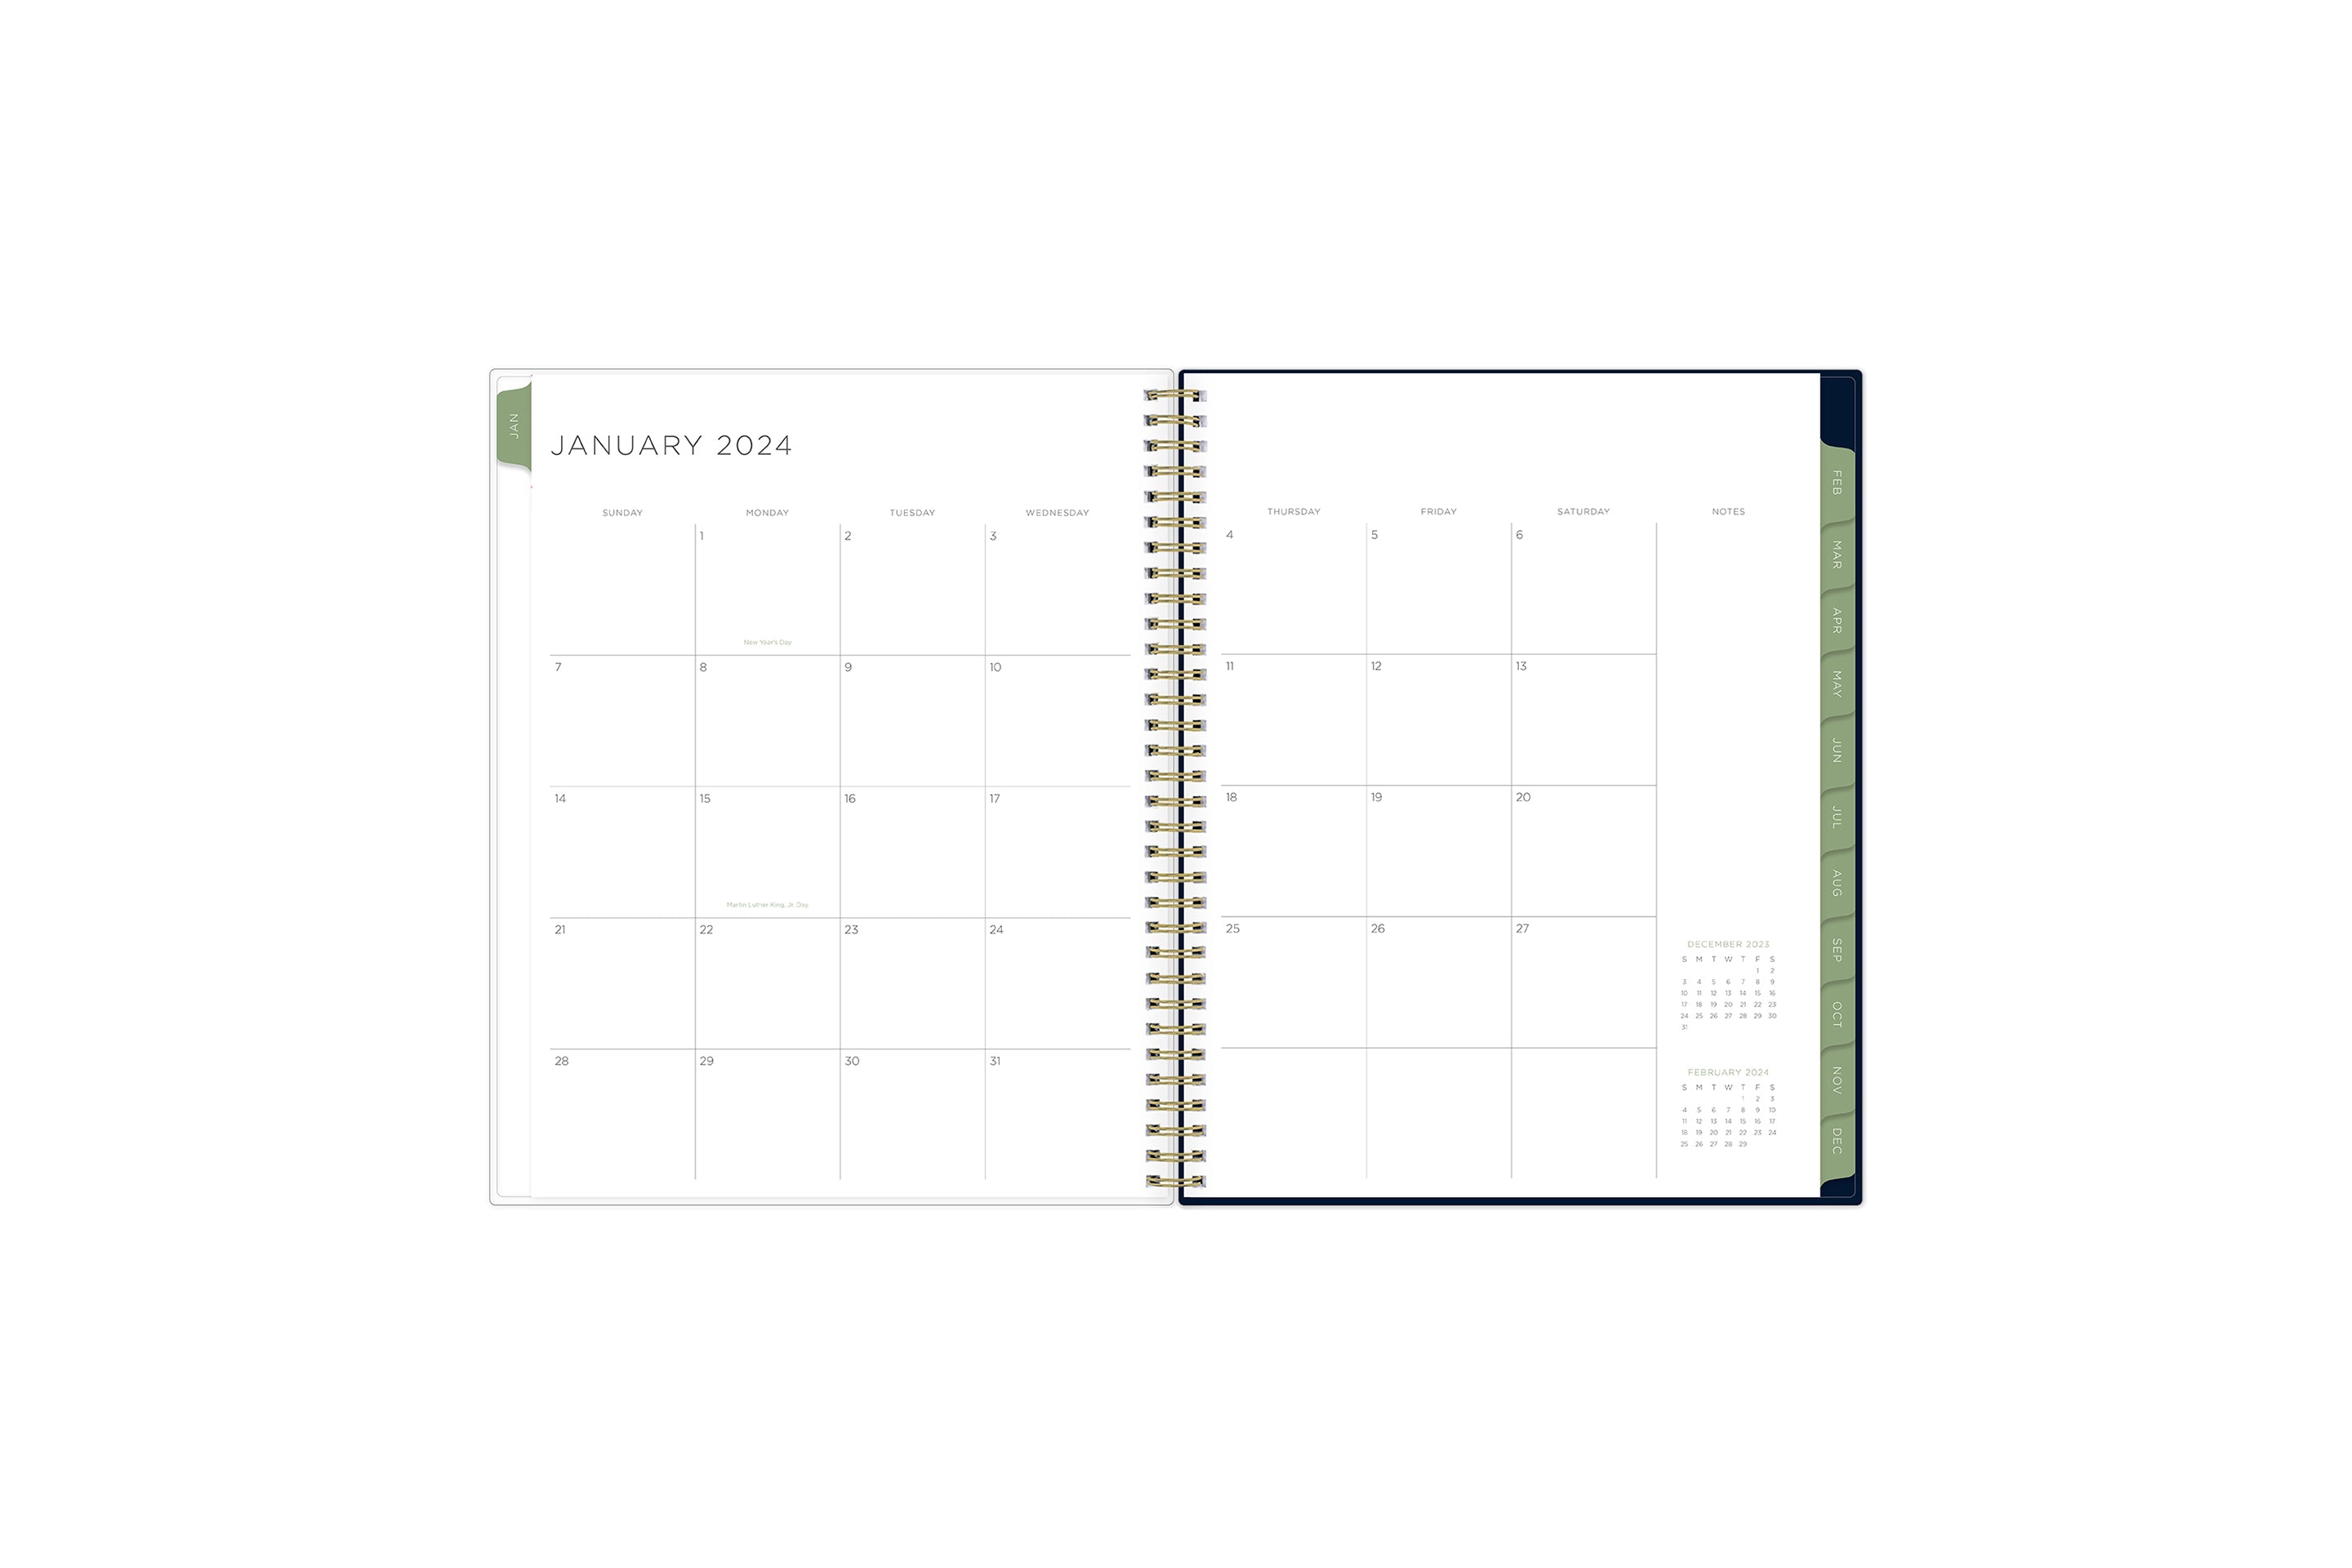 The 2024 Kelly Ventura special collection features a monthly spread with boxed days, clean white writing space, rfeference calendars, and soft olive green monthly tabs in a 8.5x11 planner size.